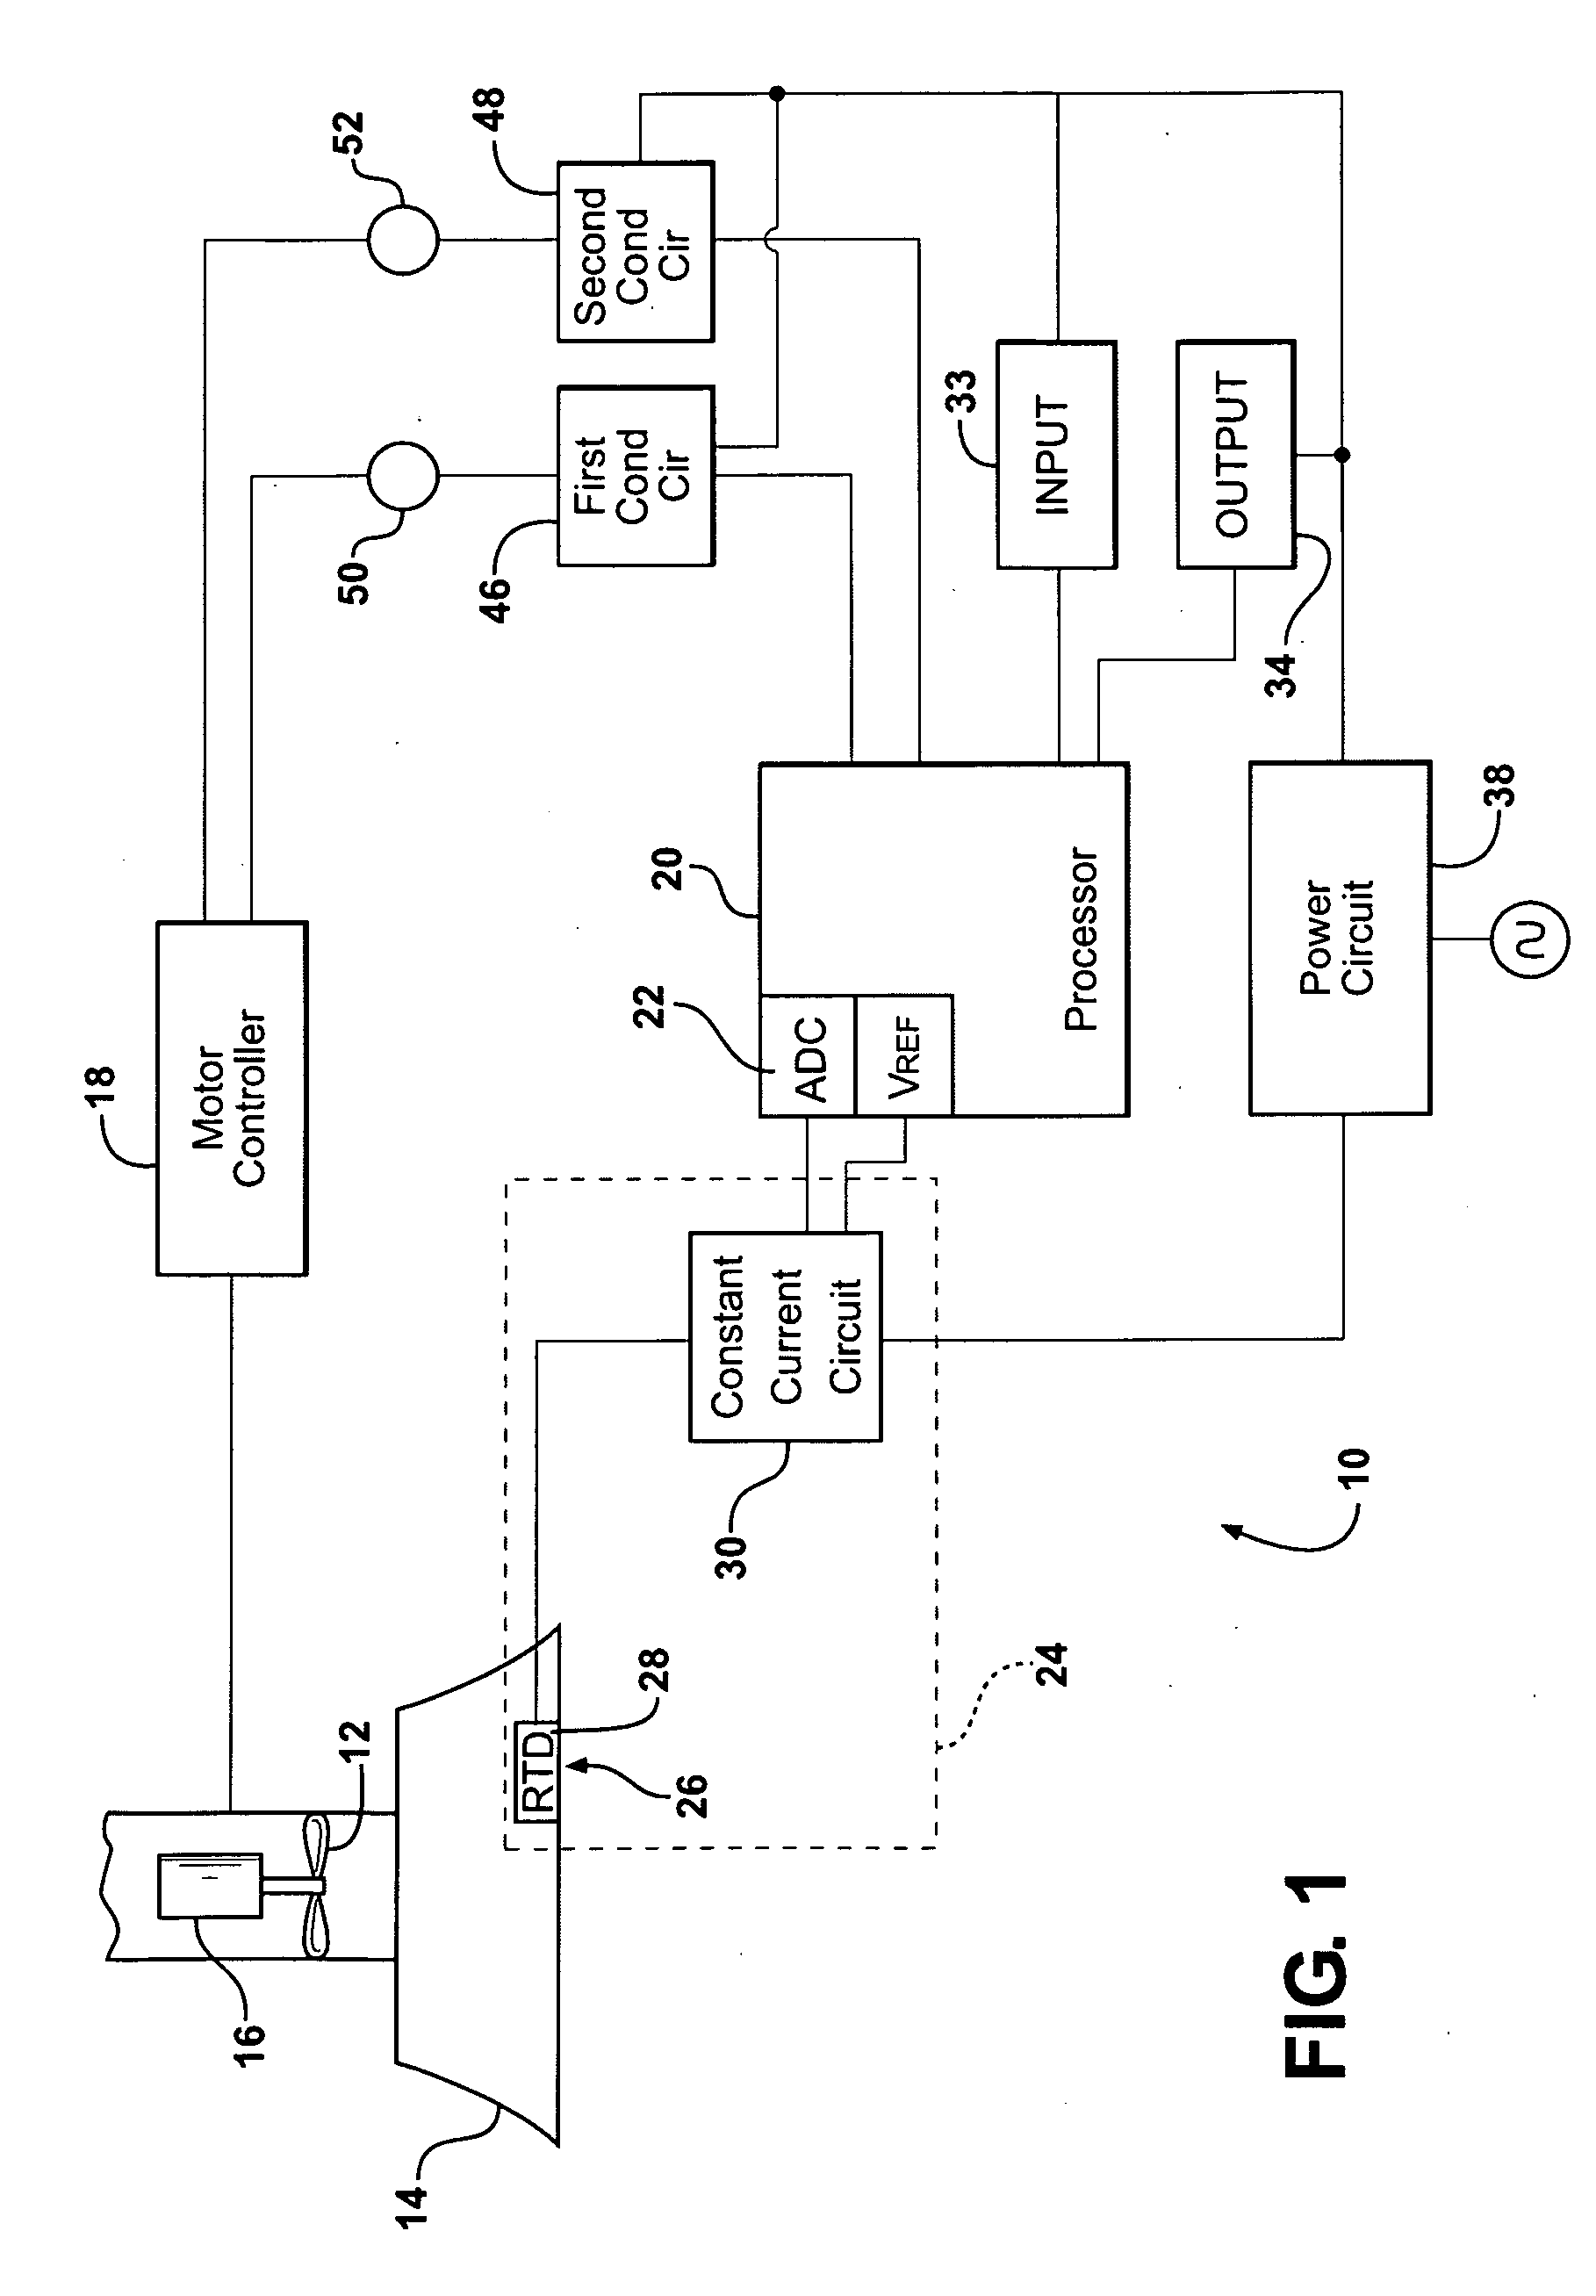 Control system and method for controlling an air handling fan for a vent hood